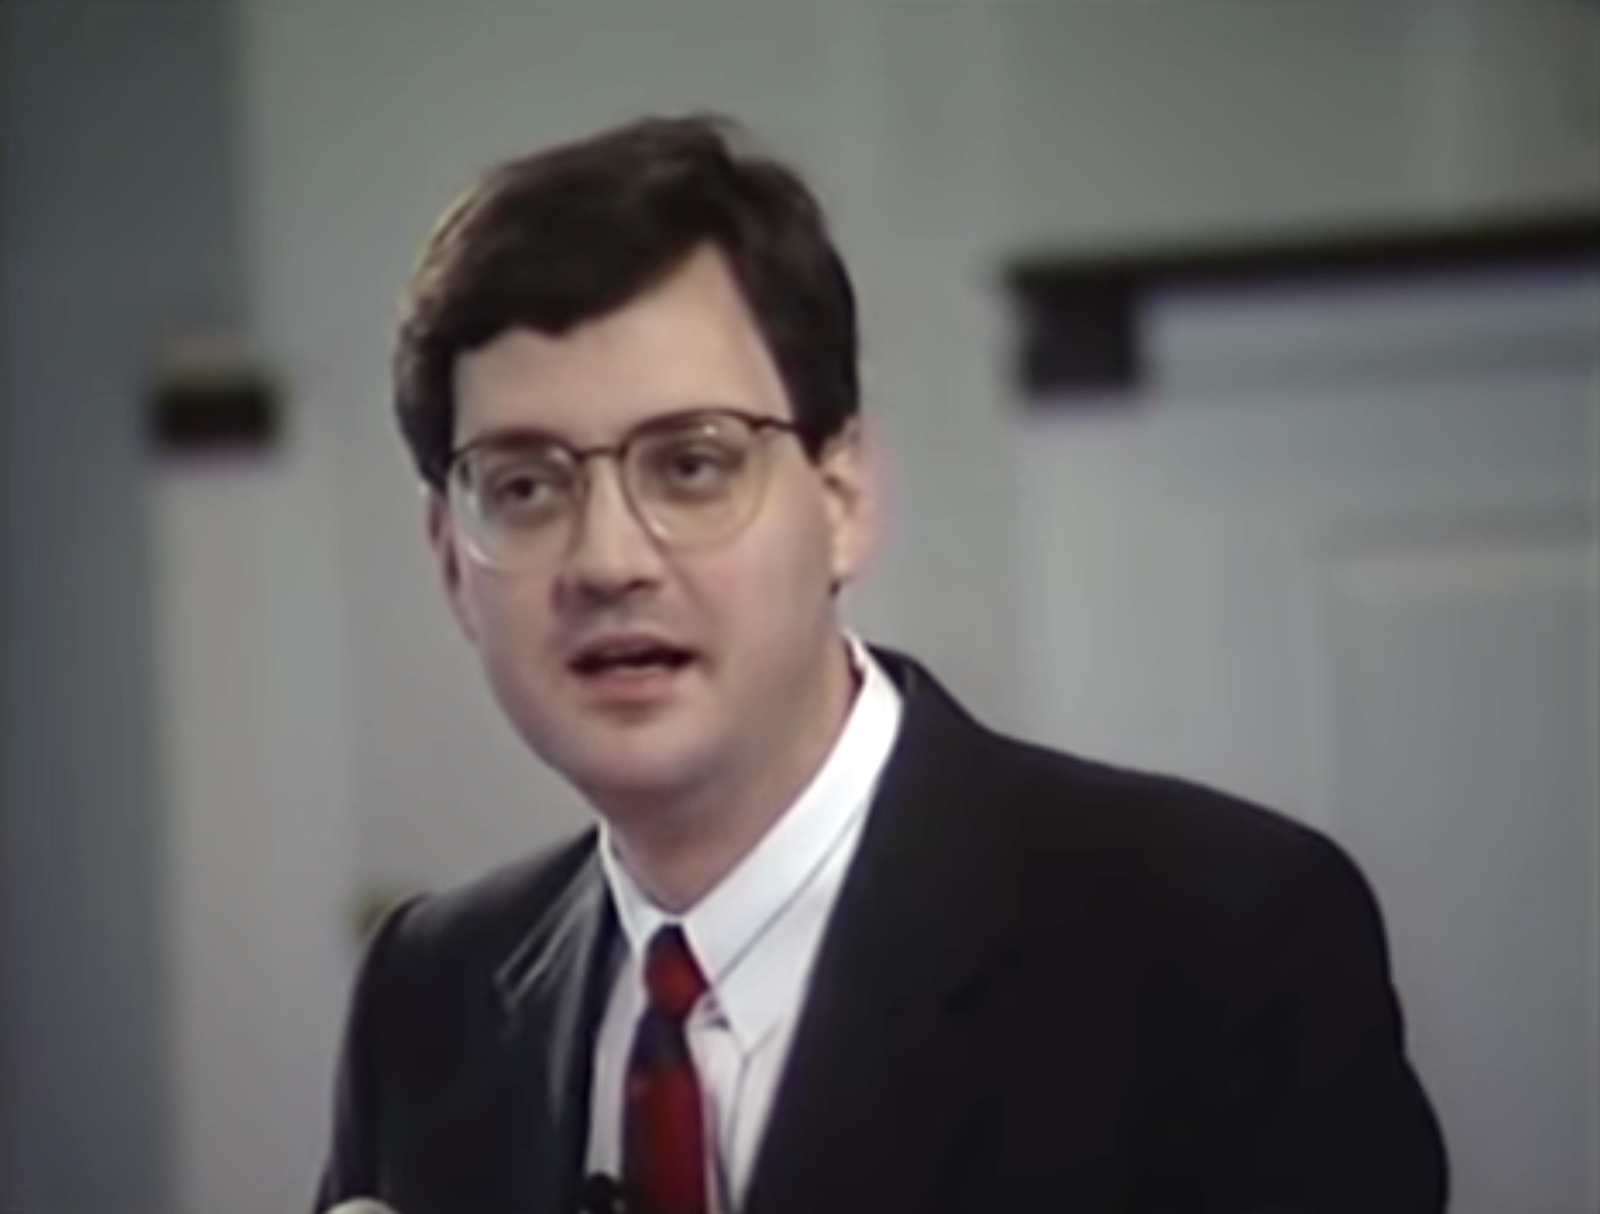 R. Albert Mohler Jr. speaks to a forum as the new president of Southern Baptist Theological Seminary in Louisville, Kentucky, in 1993. Video screen grab